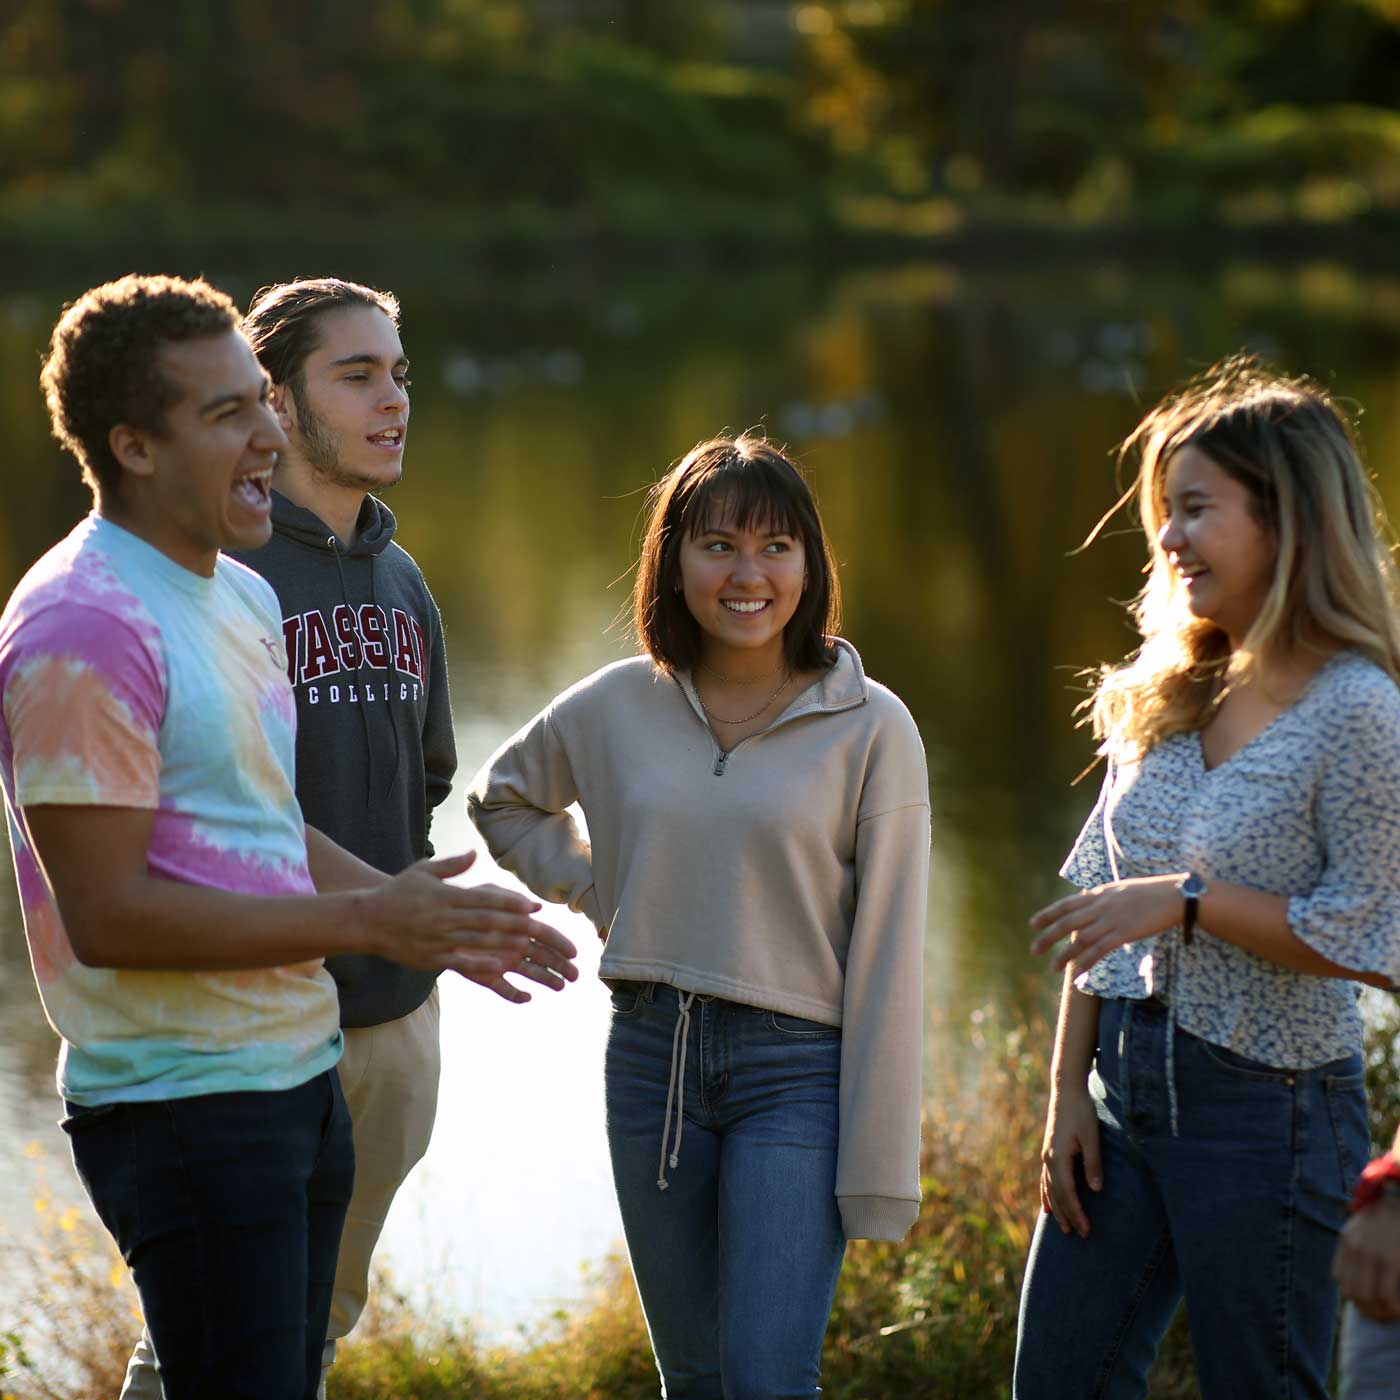 Evening sunlight shines on four people smiling and laughing in front of Sunset Lake on Vassar Campus.